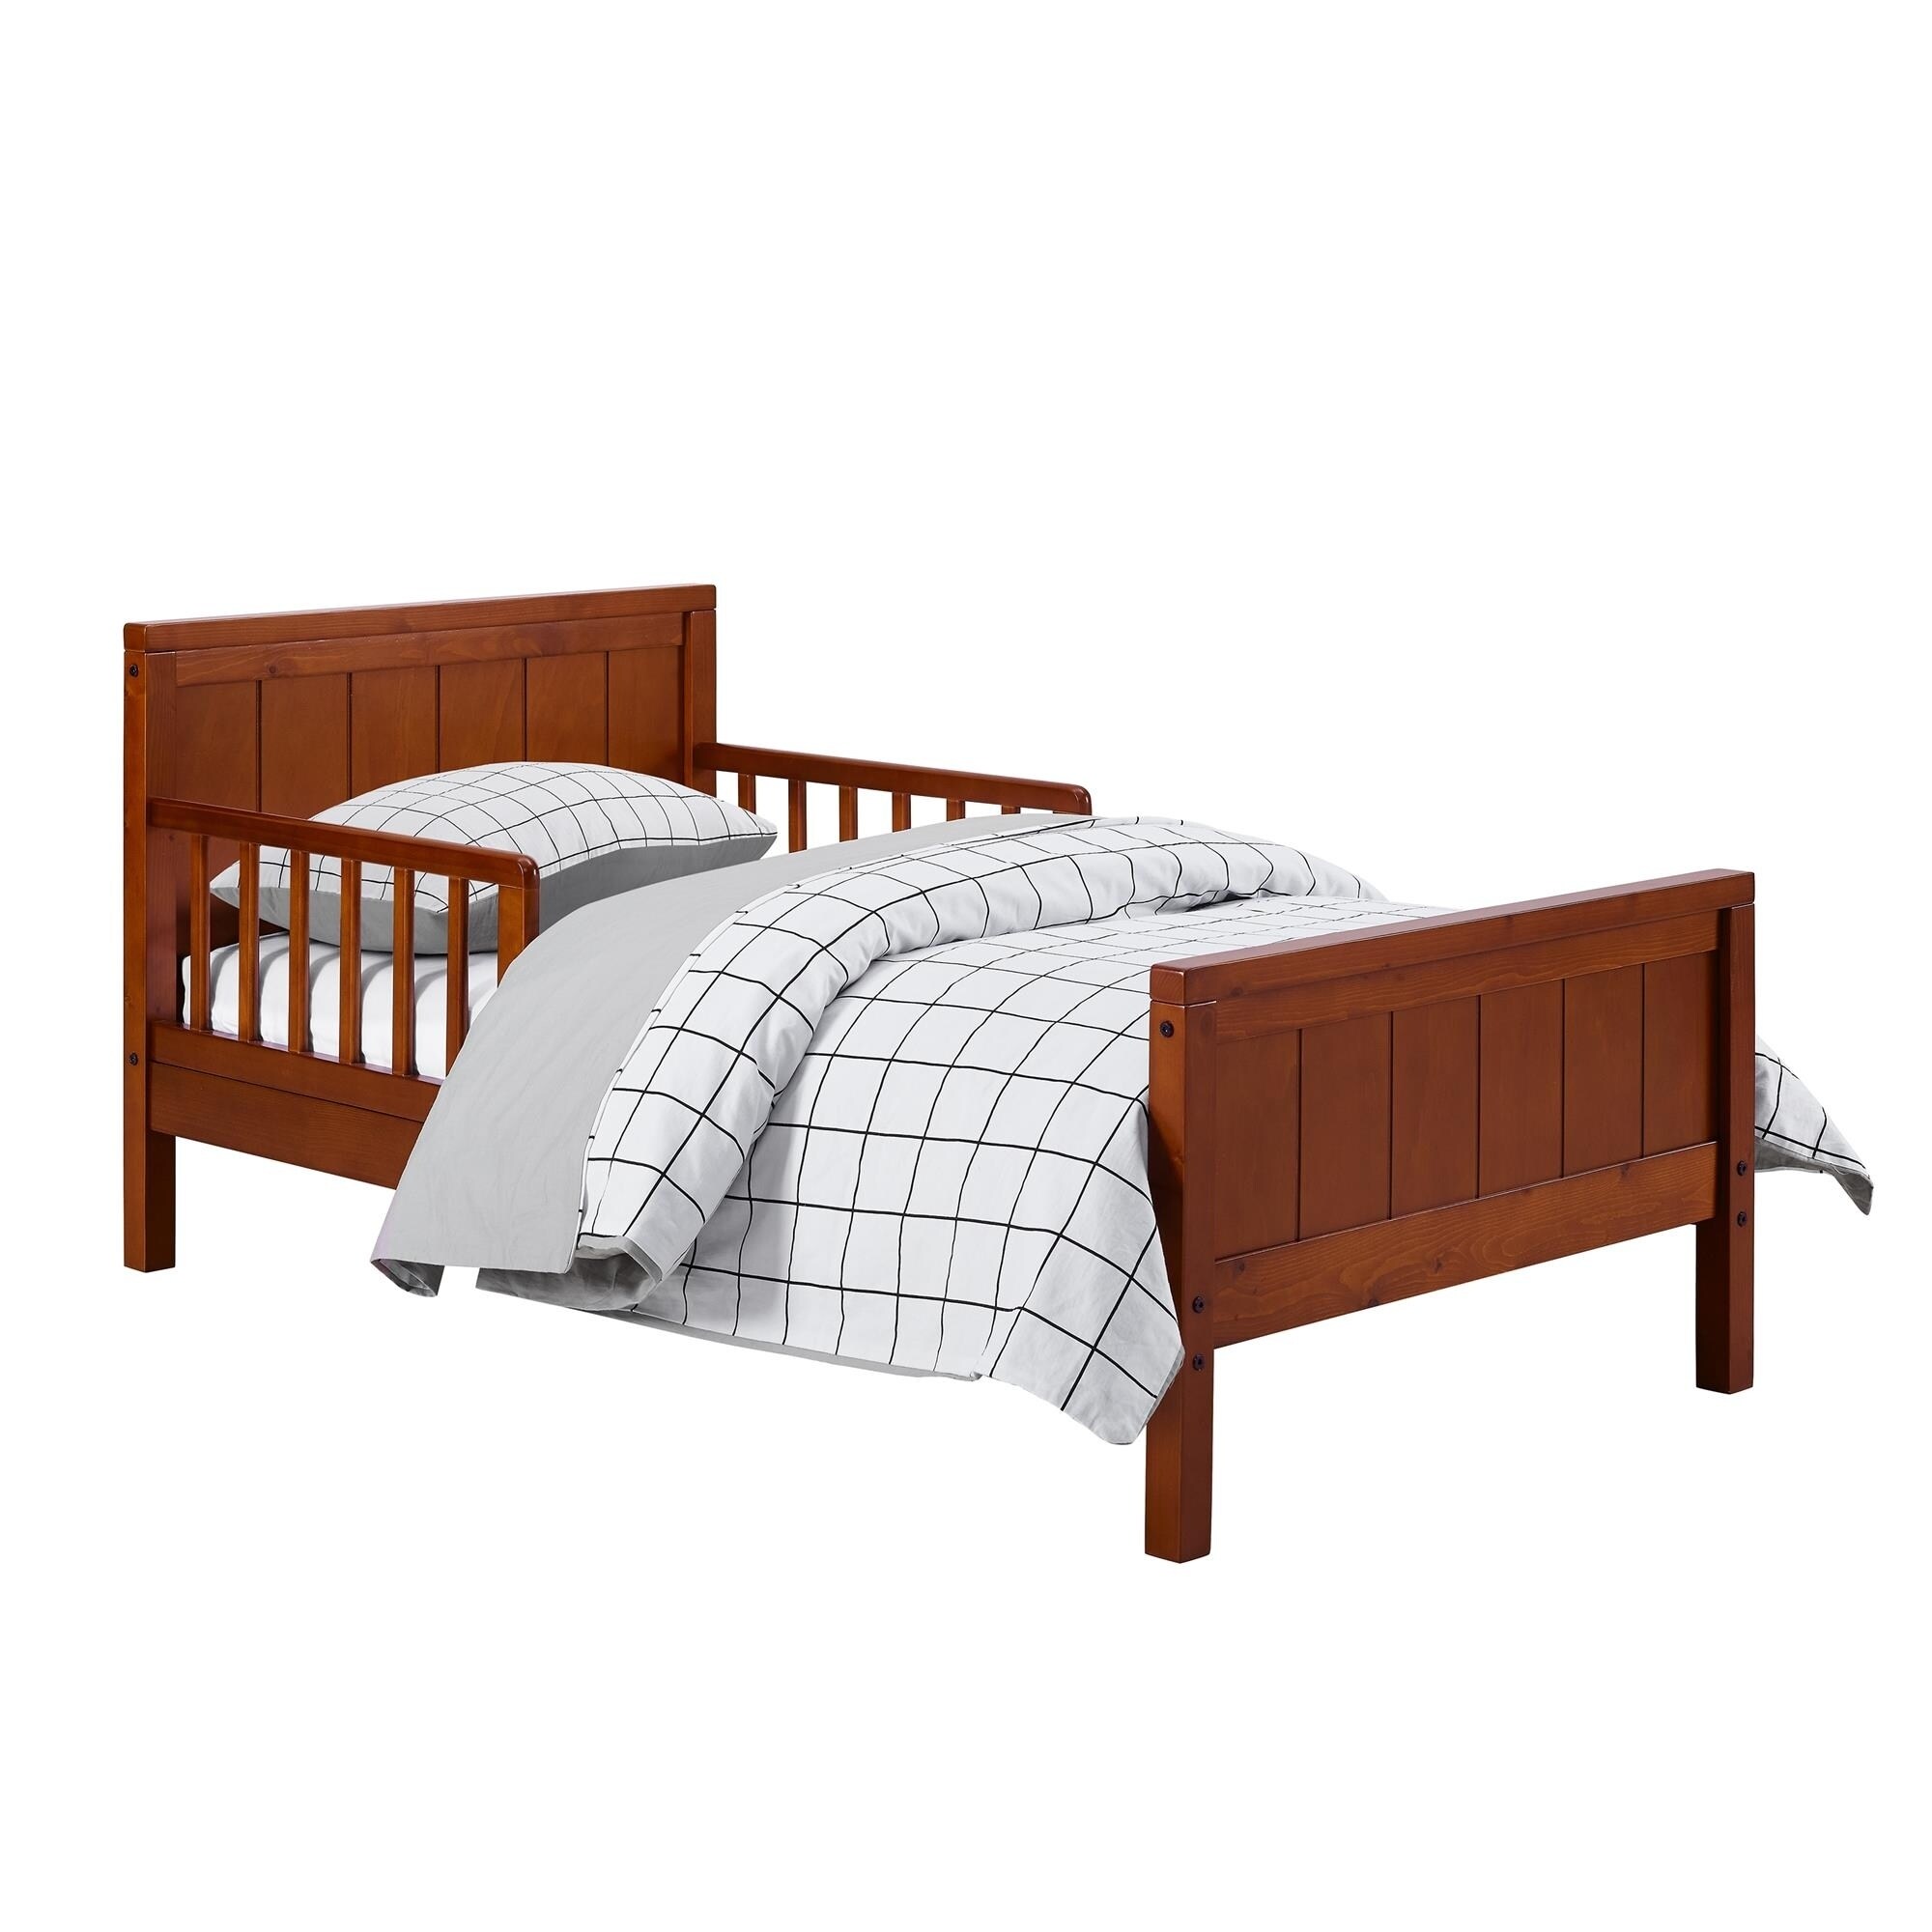 cherry wood toddler bed